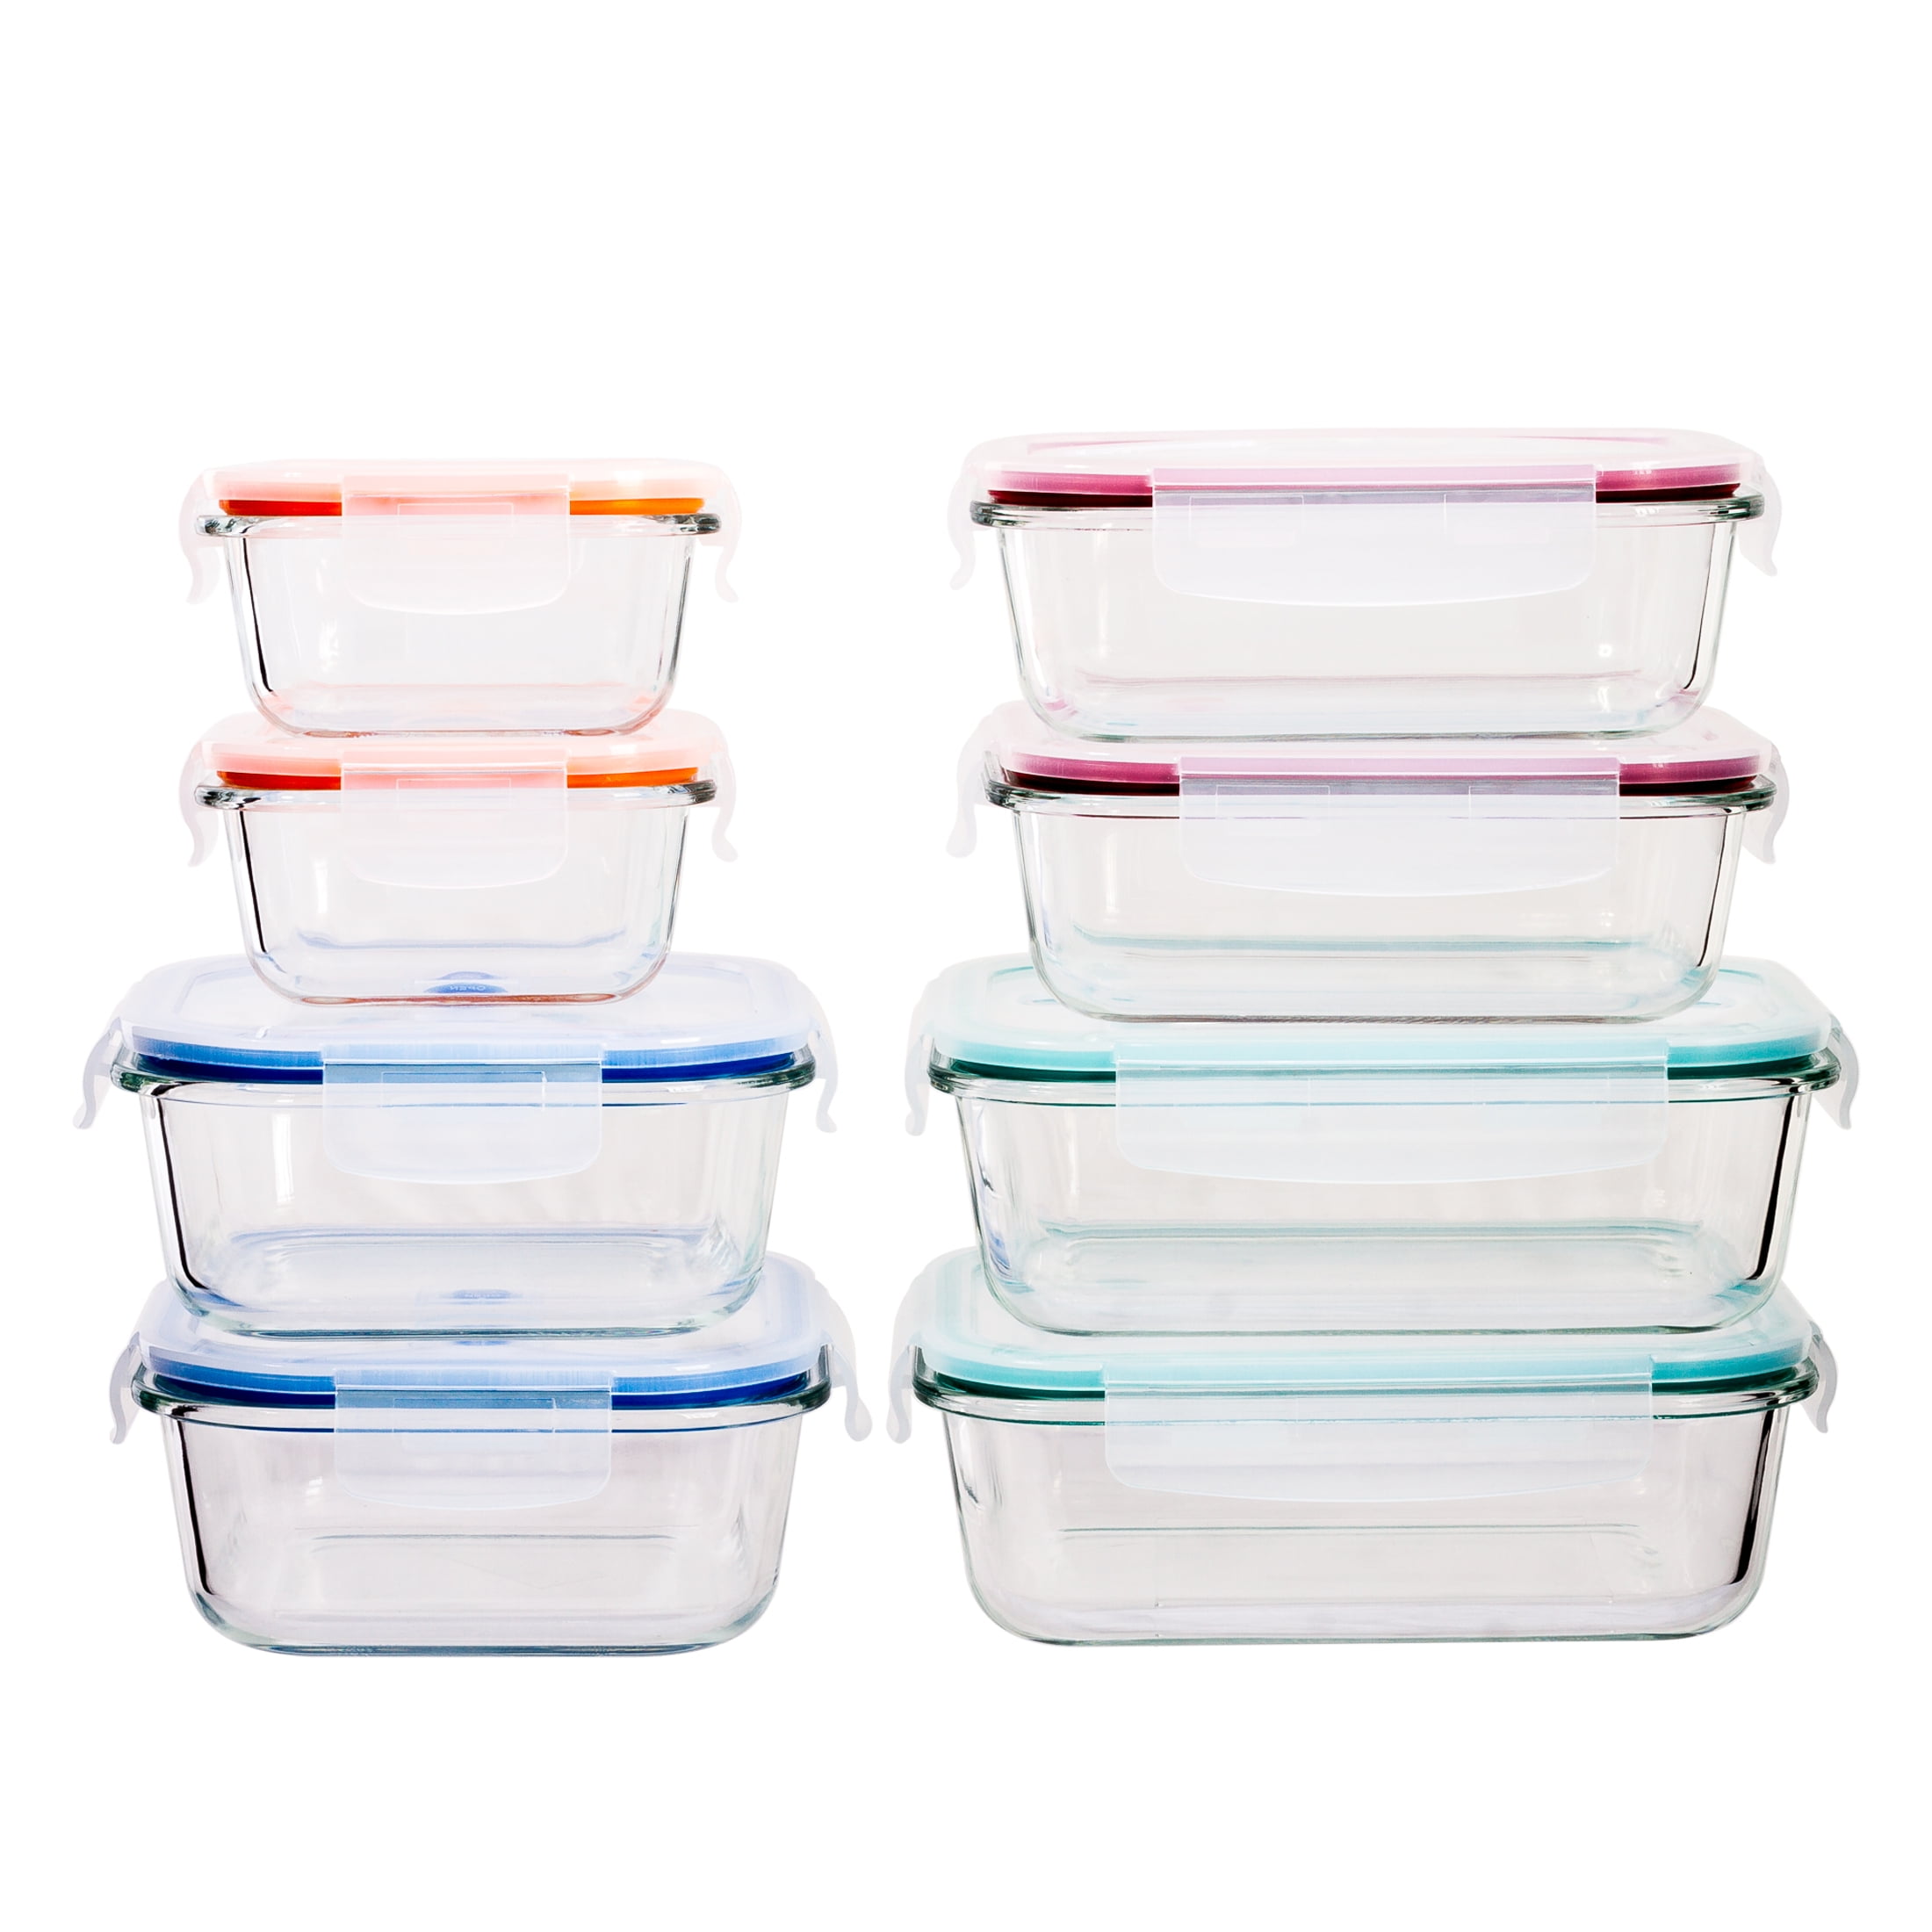 Imperial Home 8 Pc Plastic Storage Containers with Lids, Food Storage  Container Set, Kitchen Organization, Meal Prep, Blue Airtight Lock Lid